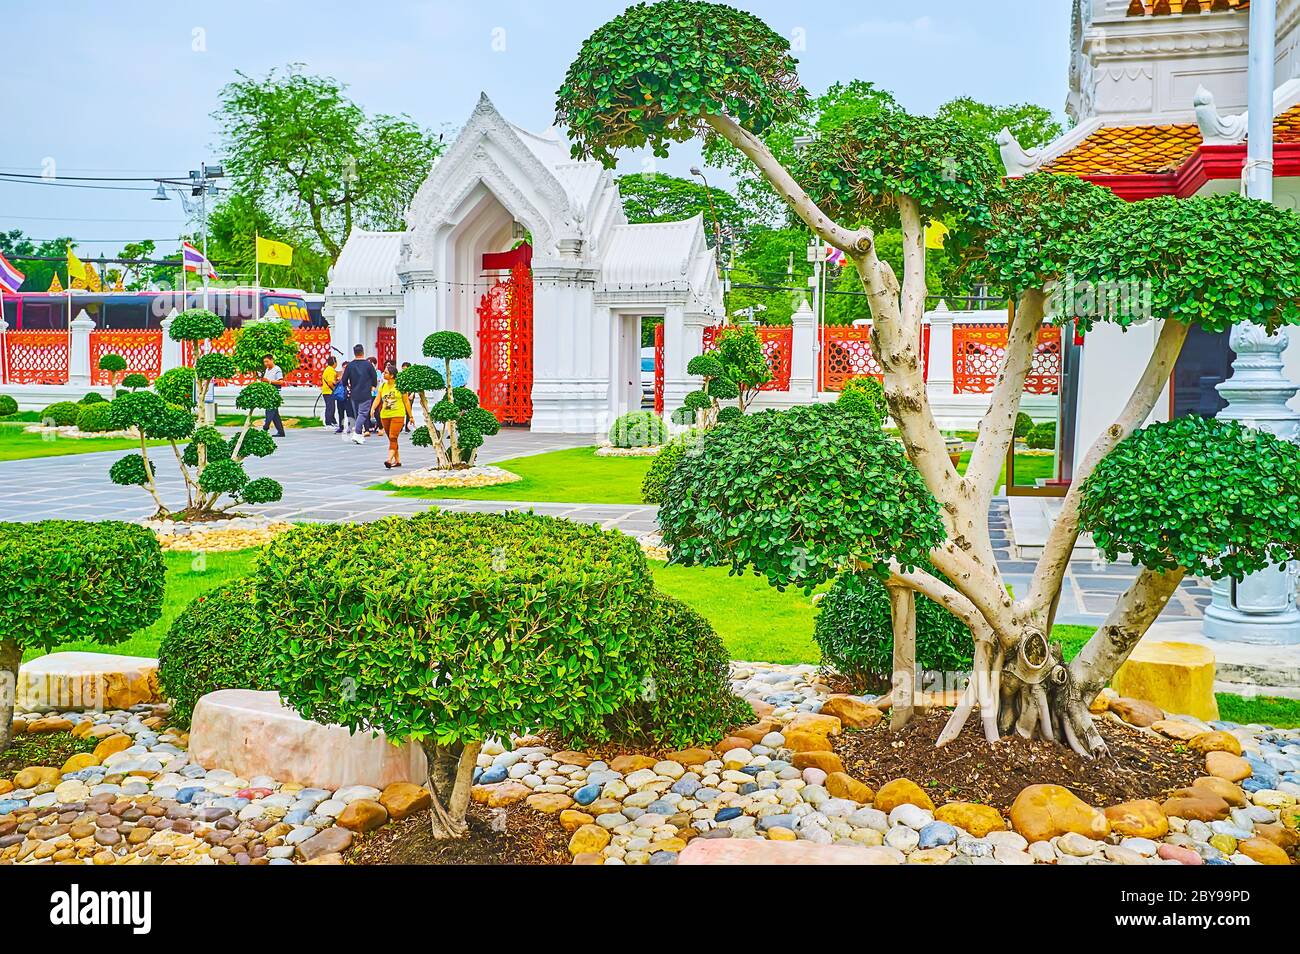 BANGKOK, THAILAND - MAY 13, 2019: Enjoy the topiary garden of Wat Benchamabophit Dusitvanaram Marble Temple with its carved white gate on the backgrou Stock Photo